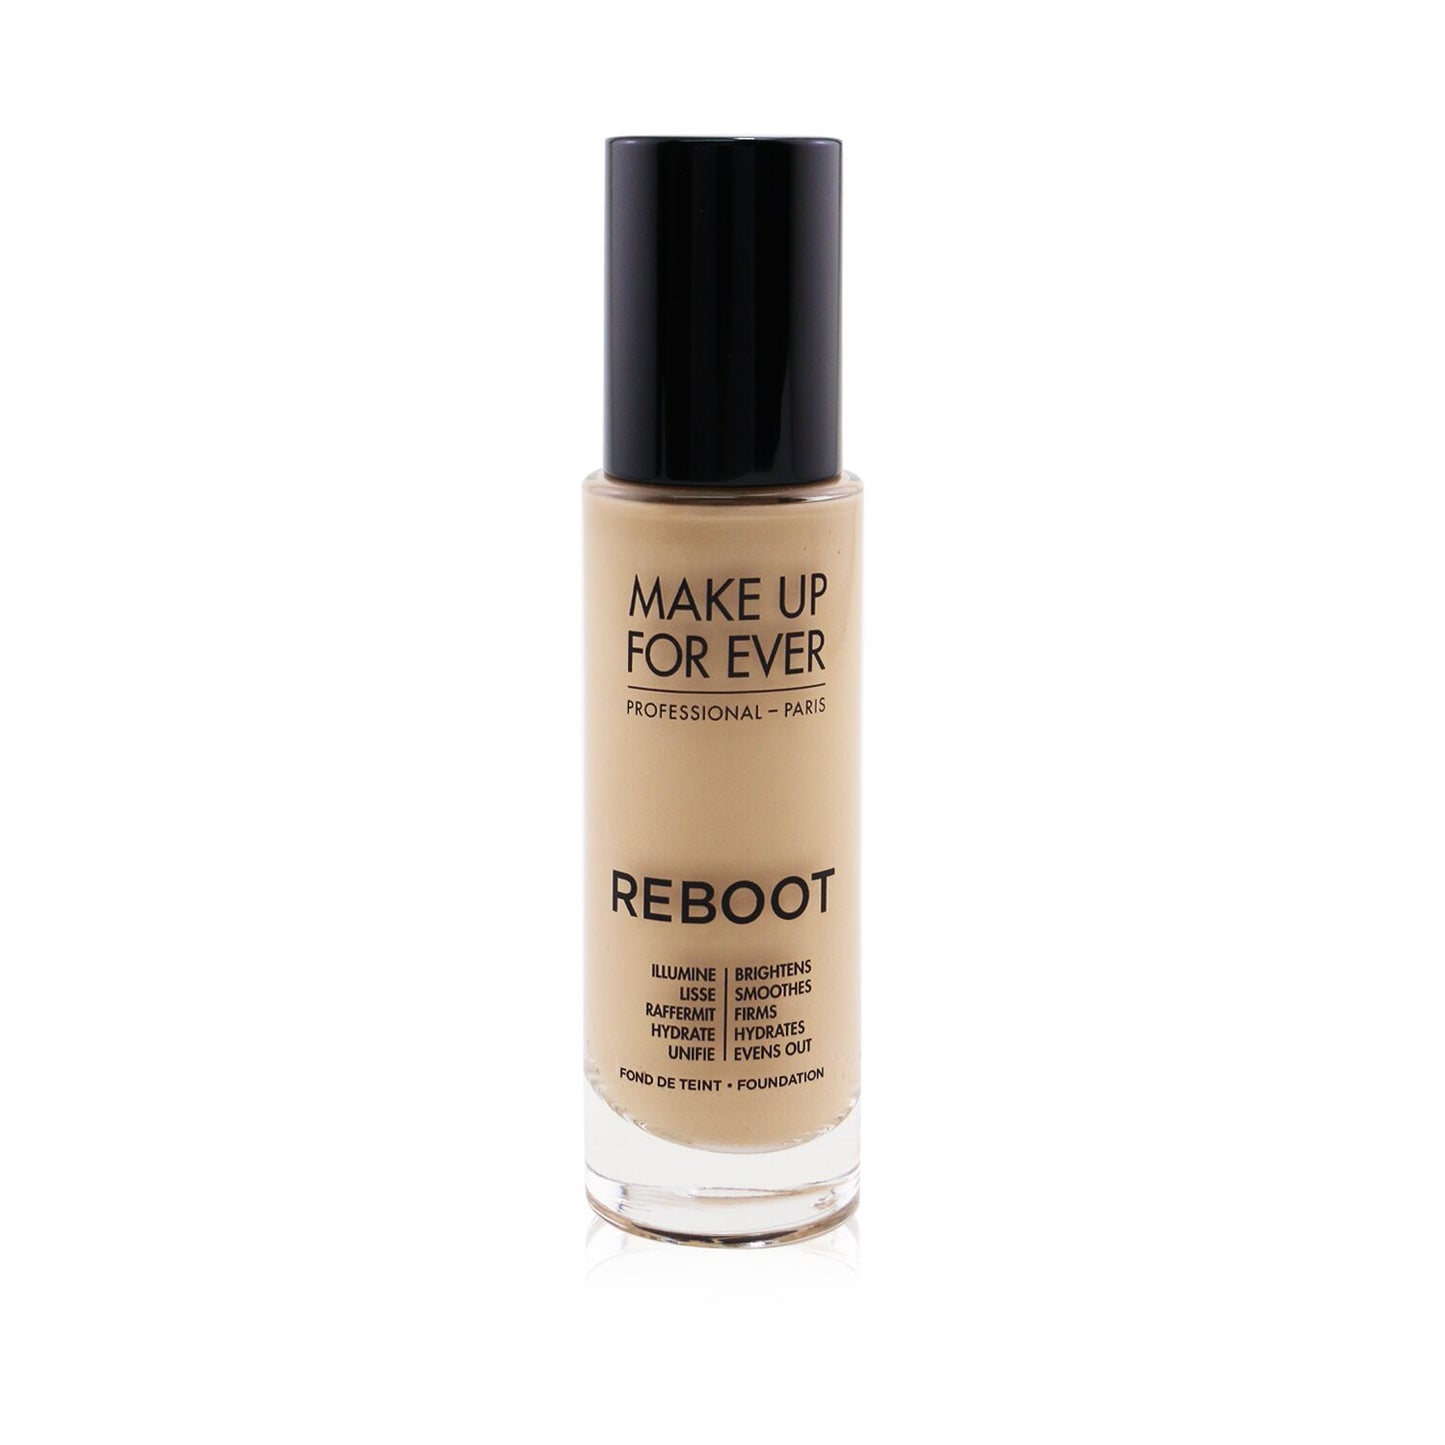 MAKE UP FOR EVER - Reboot Active Care In Foundation - # R250 Nude Beige 145367 30ml/1.01oz